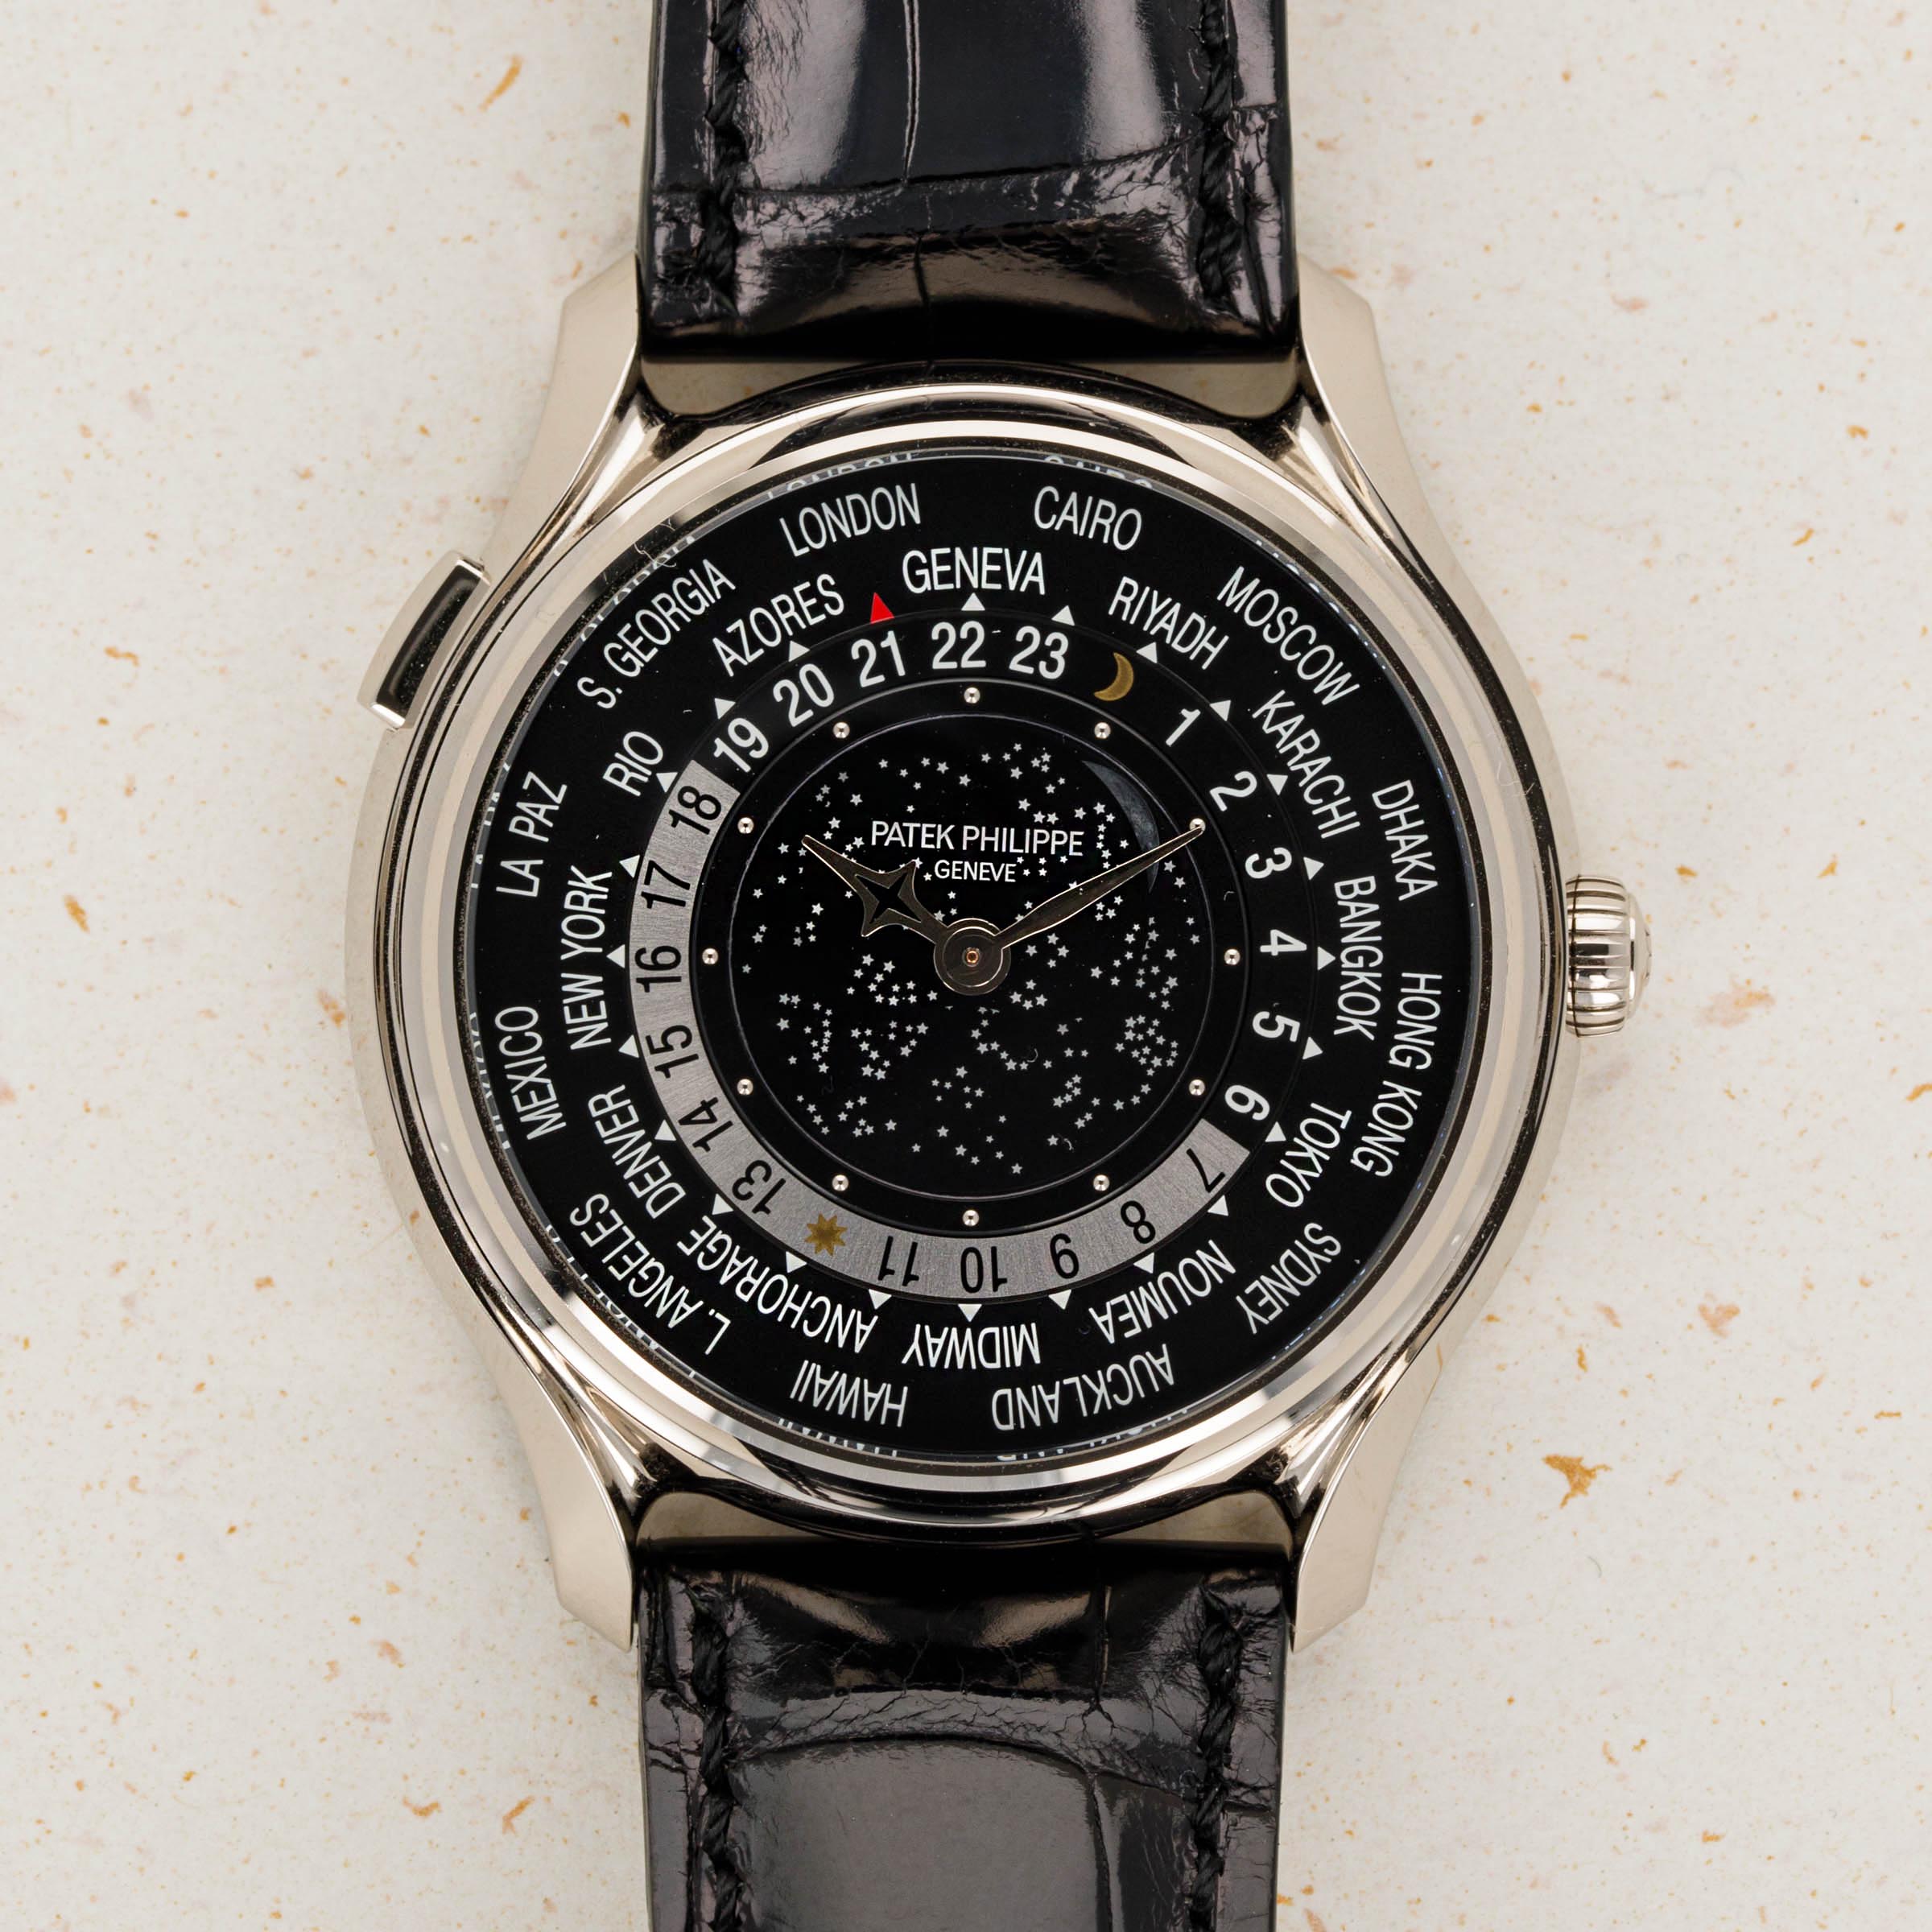 Patek Philippe Wold Time 5575G 17th Anniversary Edition 18k WG | Auctions |  Loupe This